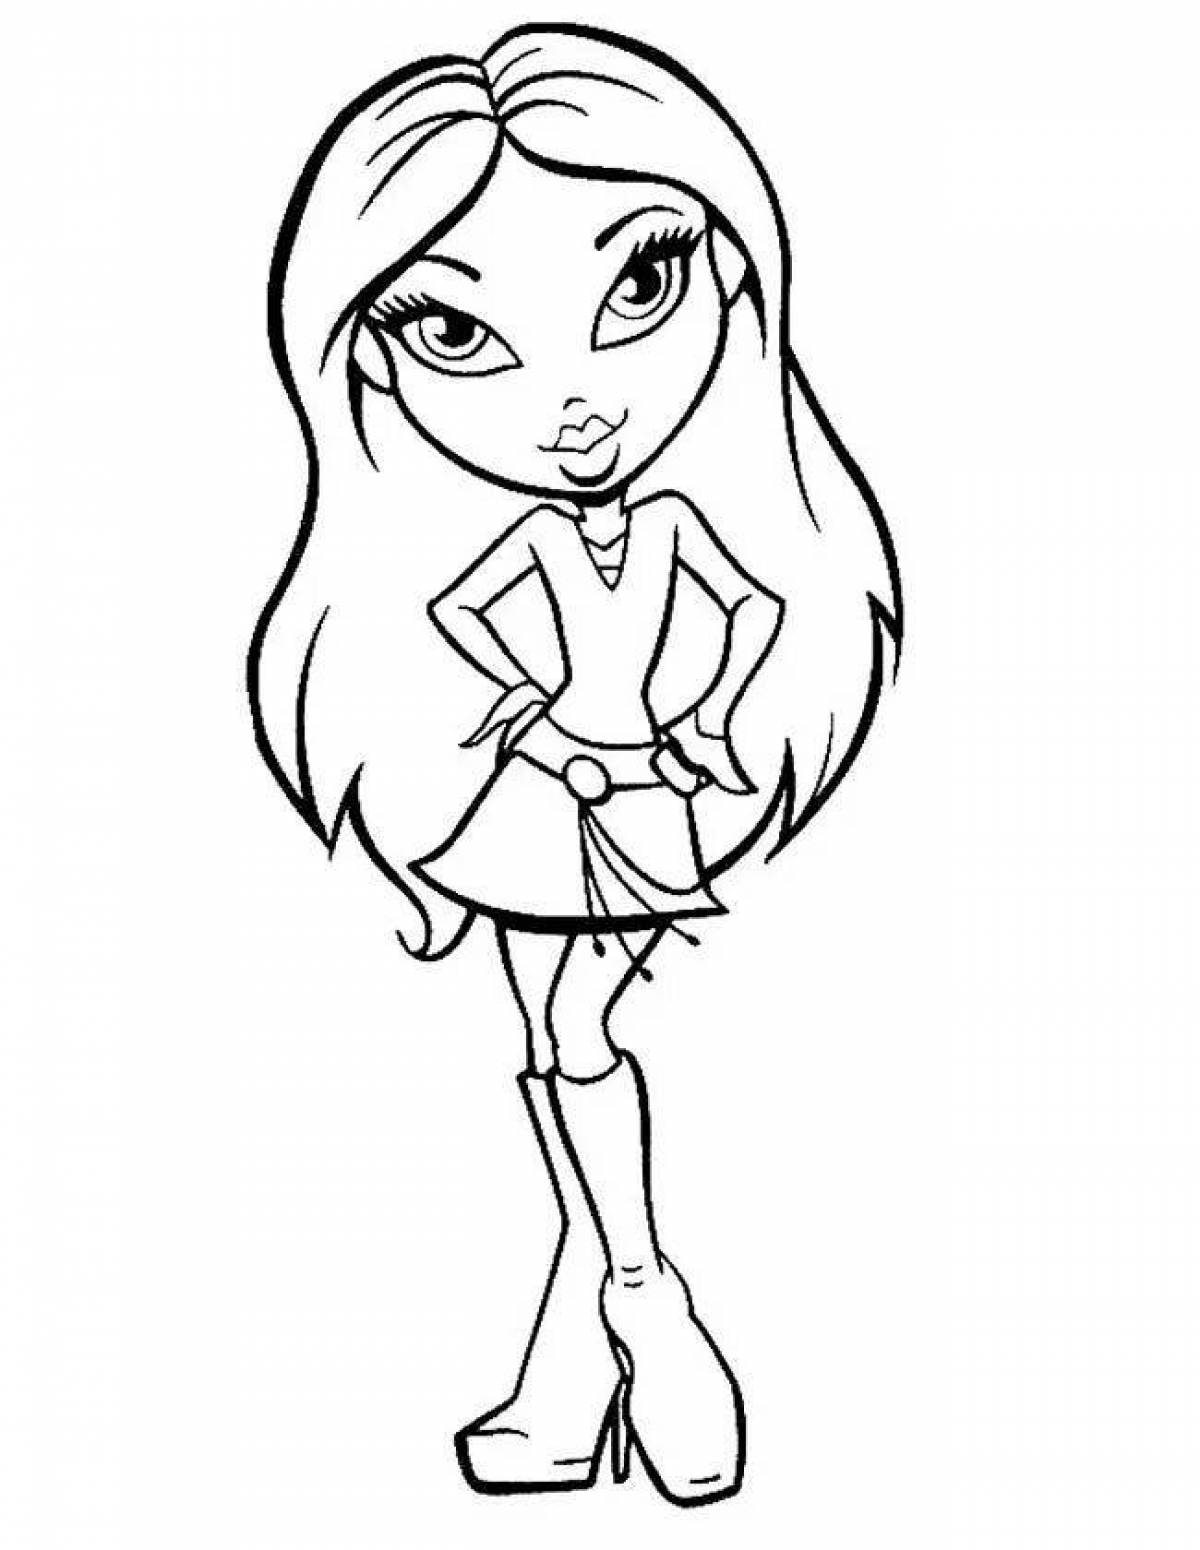 Great bratz doll coloring book